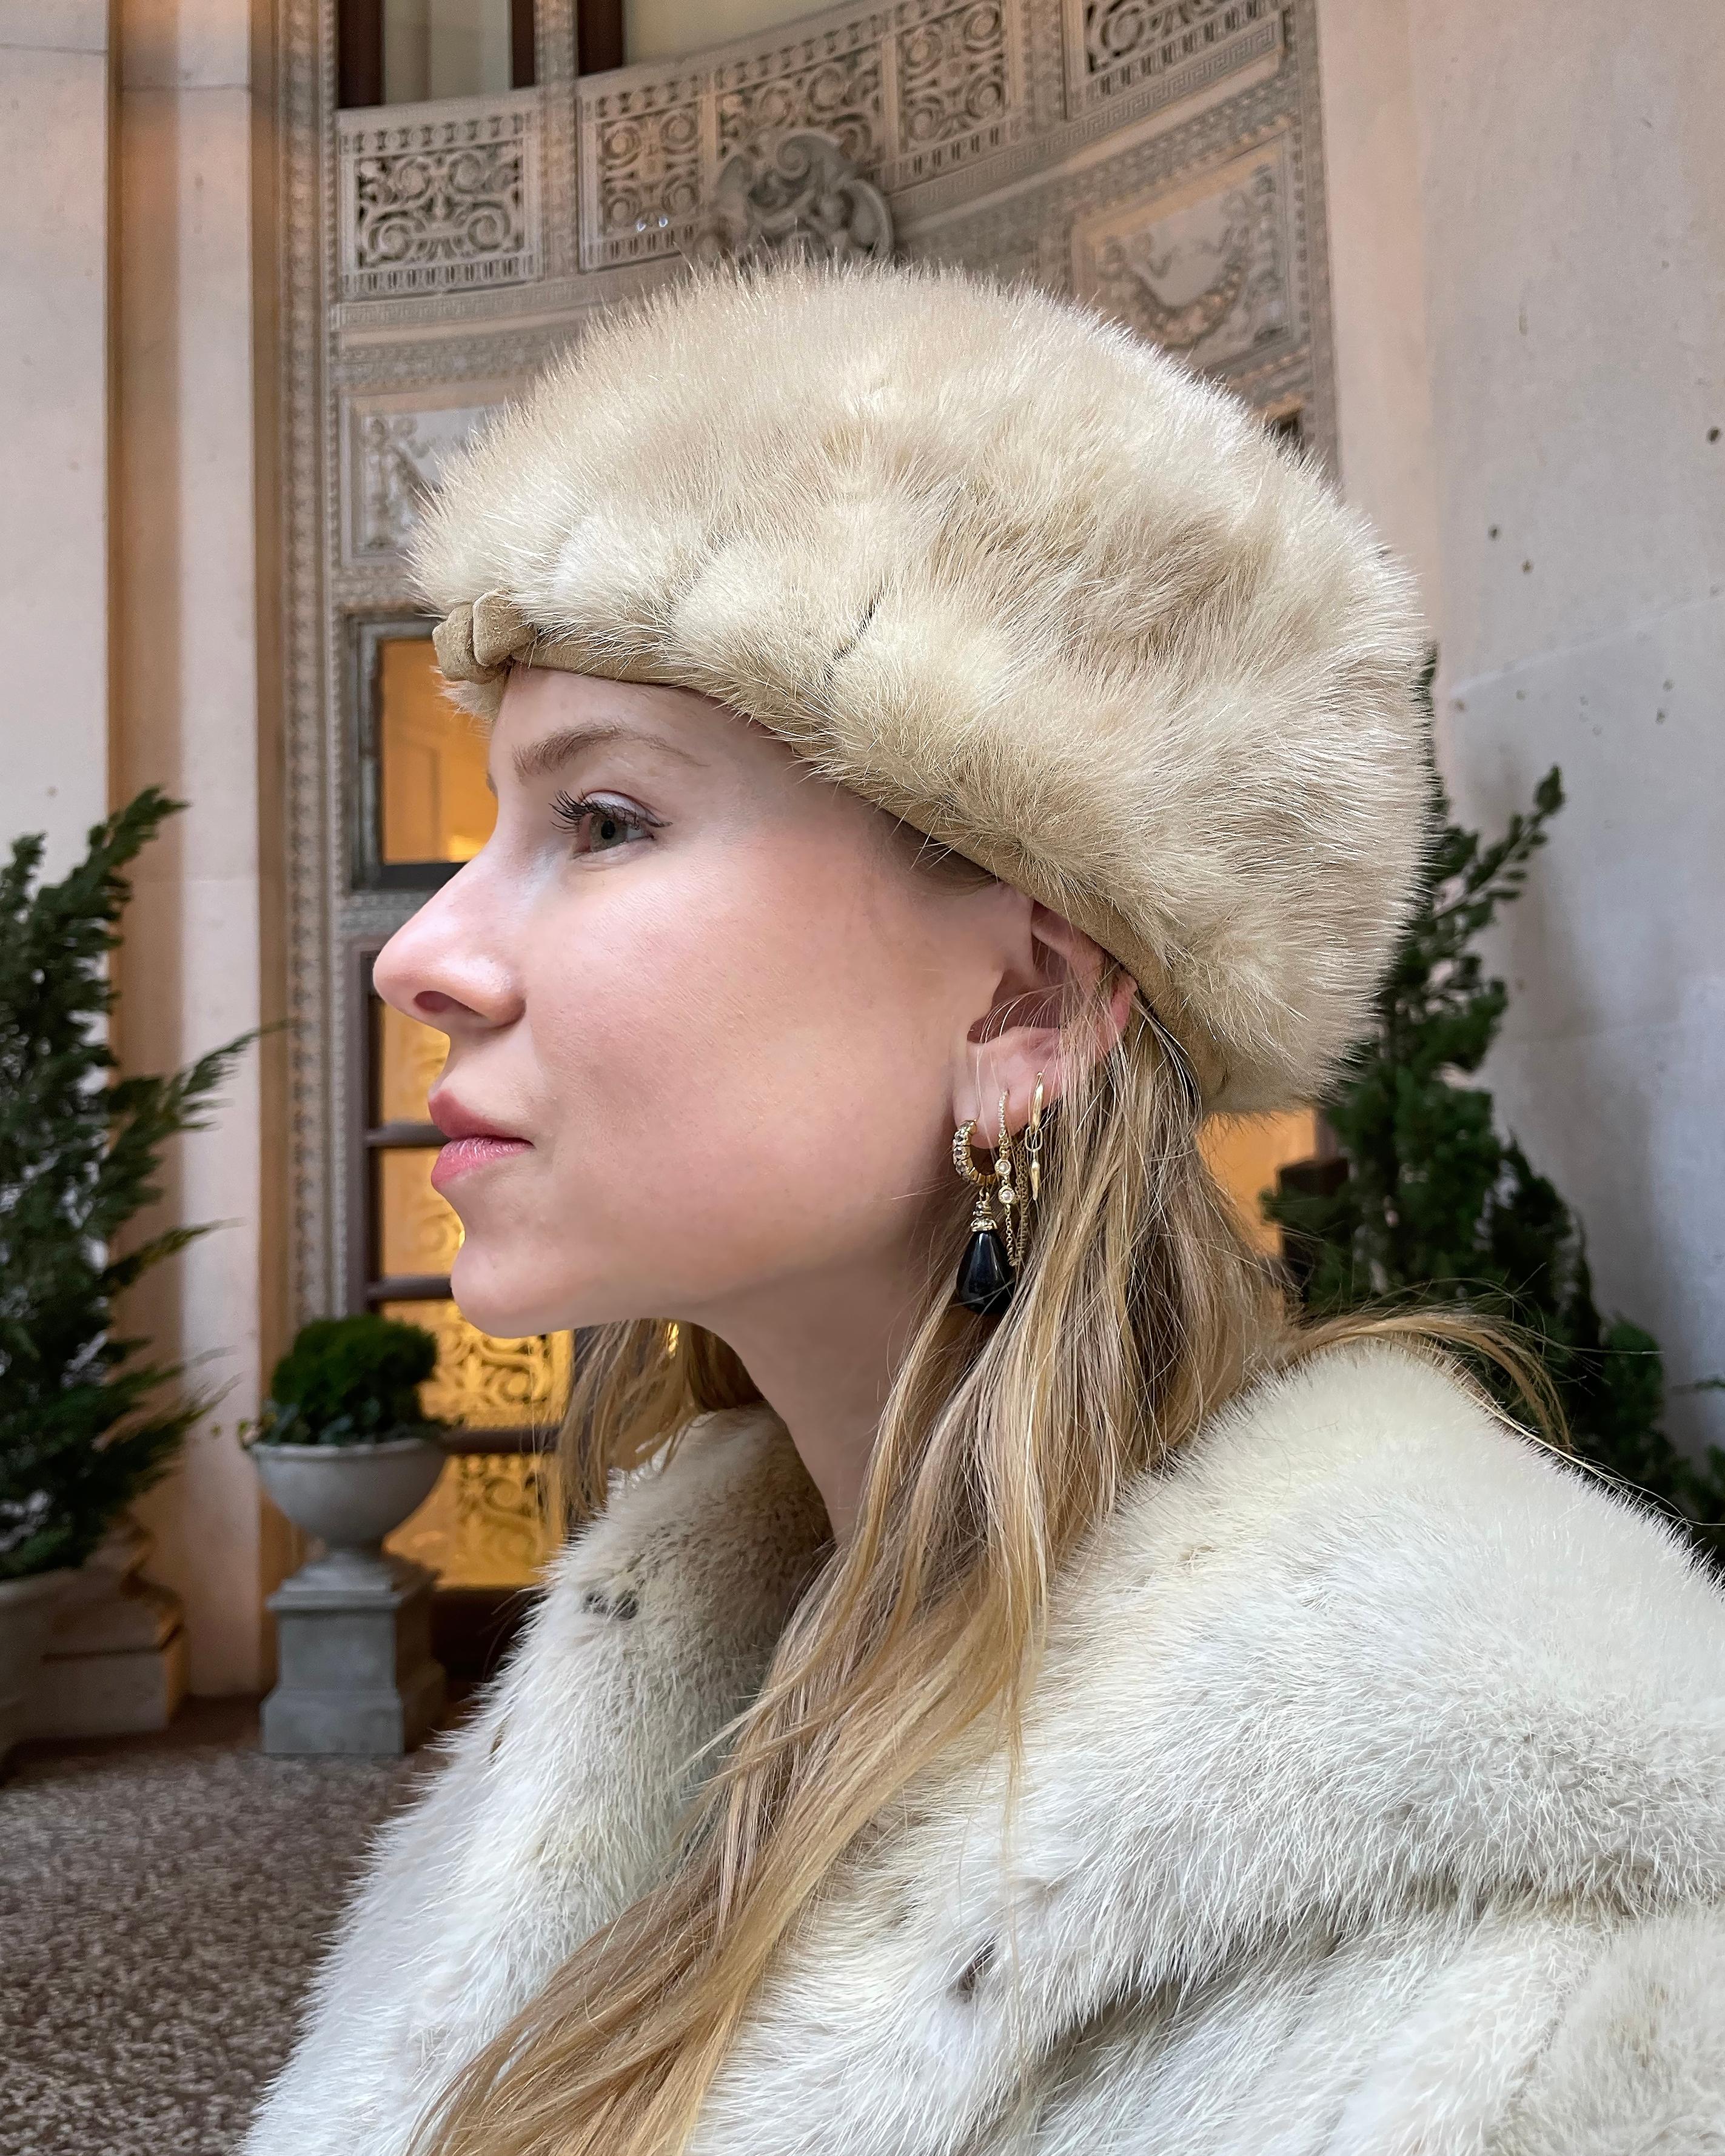 Vintage 1960s Mink Pillbox Hat: This mink fur hat is so sweet— it feels straight out of a look Catherine Deneuve would have worn in the 1960s. The blonde mink is so incredibly soft. It was made in the 1960s by famed New York milliner Betmar. It's